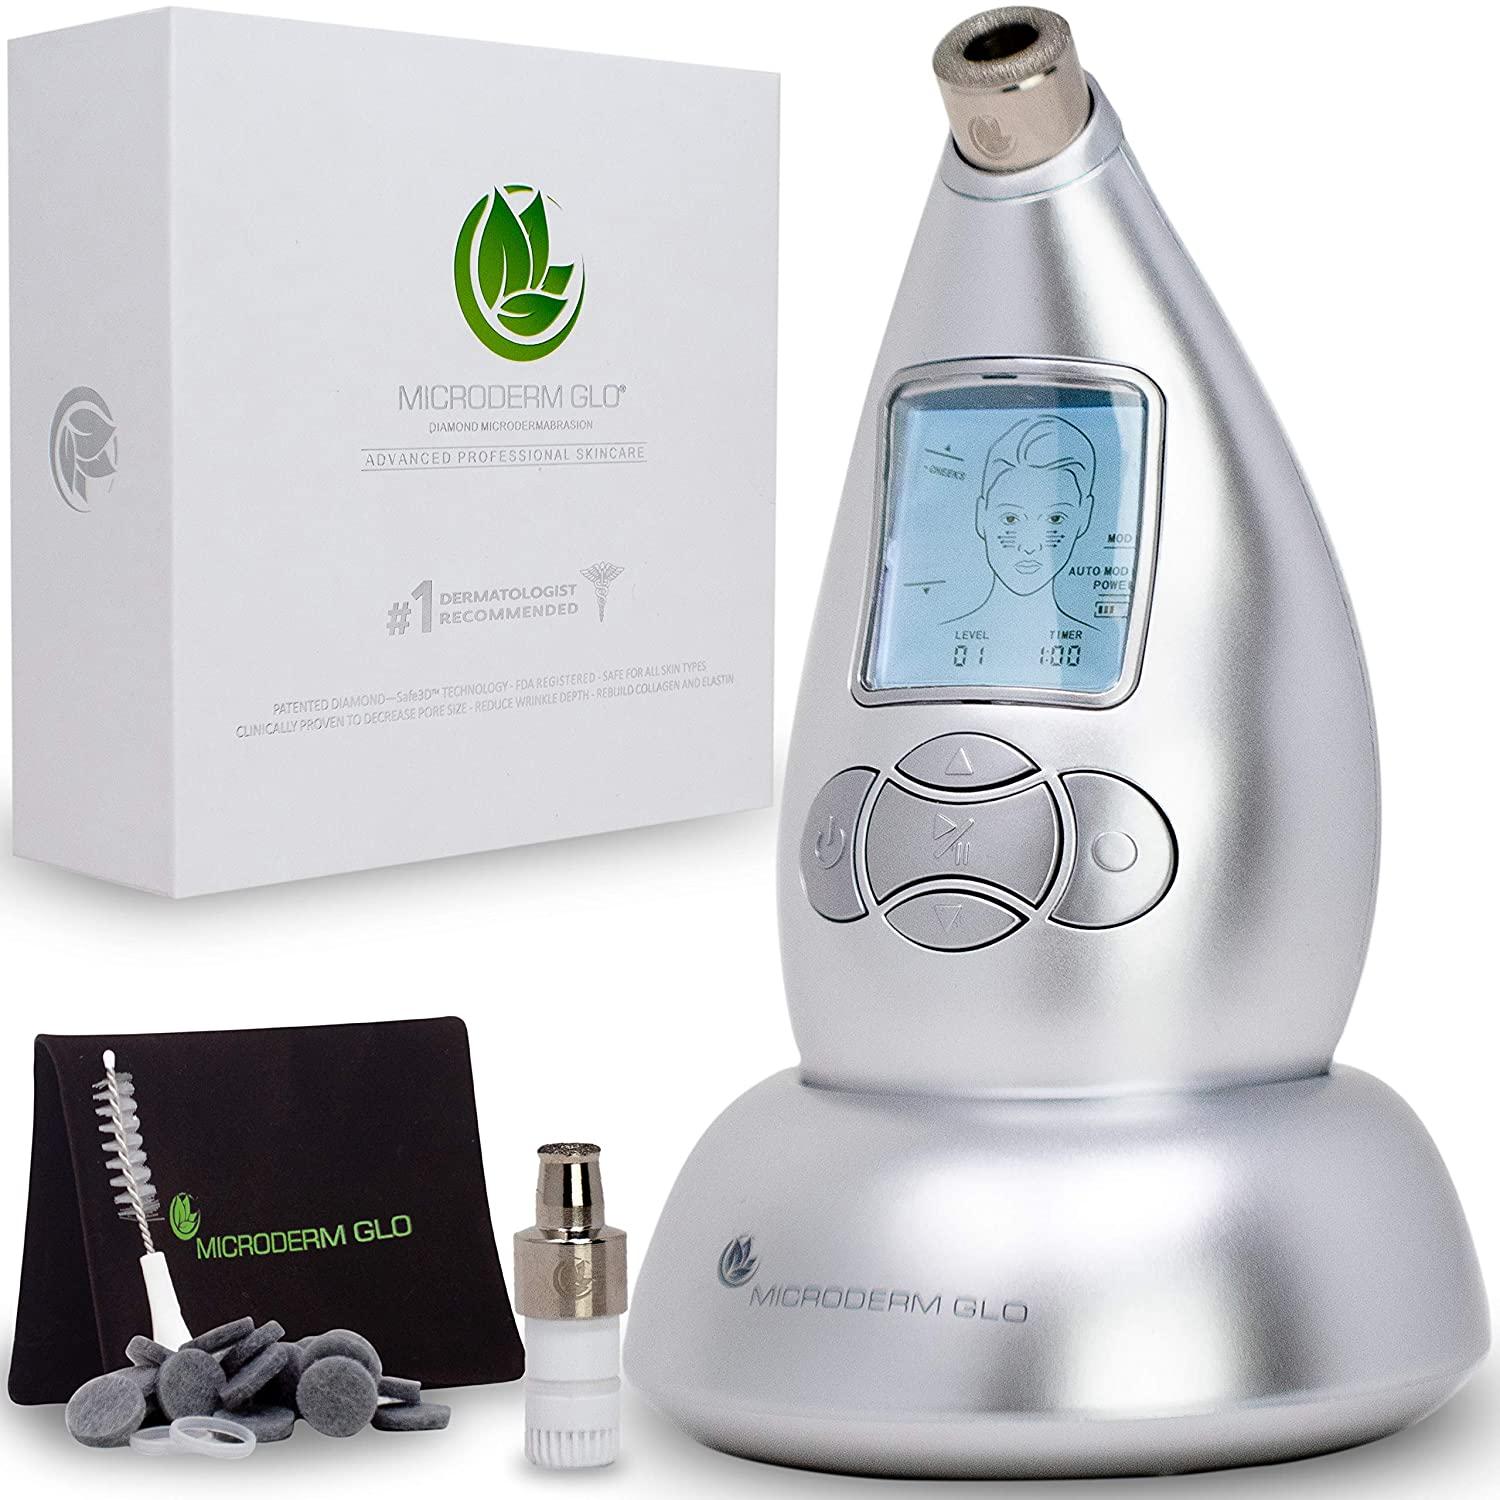 Microderm GLO Diamond Microdermabrasion Machine for $129.99 Shipped